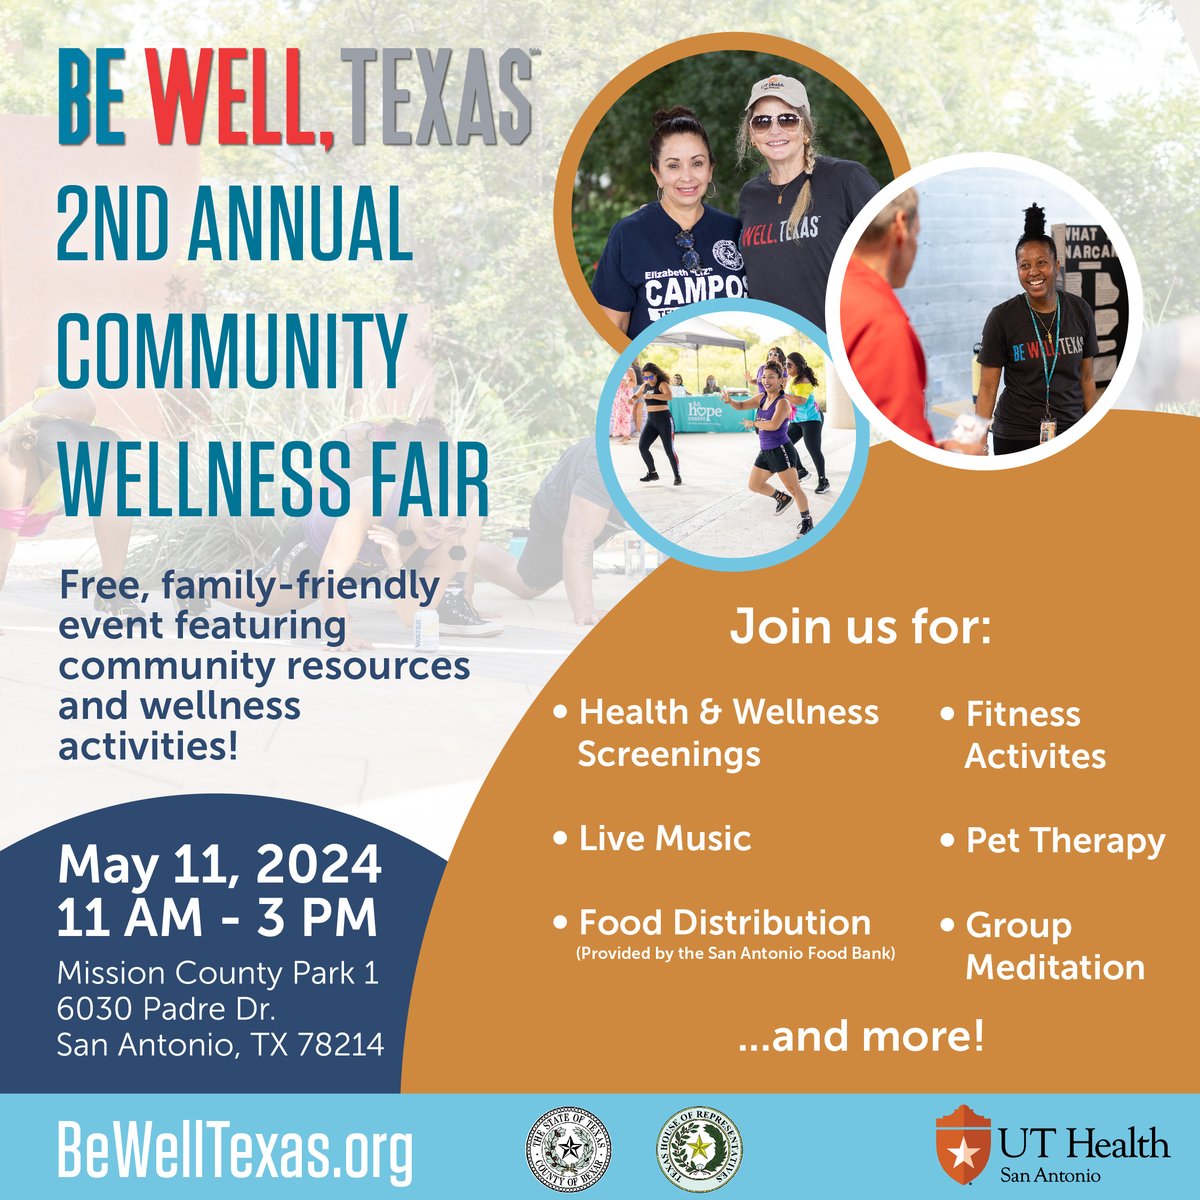 Join Be Well Texas for our 2nd Annual FREE Community Wellness Fair on 5/11. Enjoy family fun in the sun, community resources, and activities to support health and wellness! 😎☀️ This event will feature several organizations from around San Antonio! We hope to see you there!